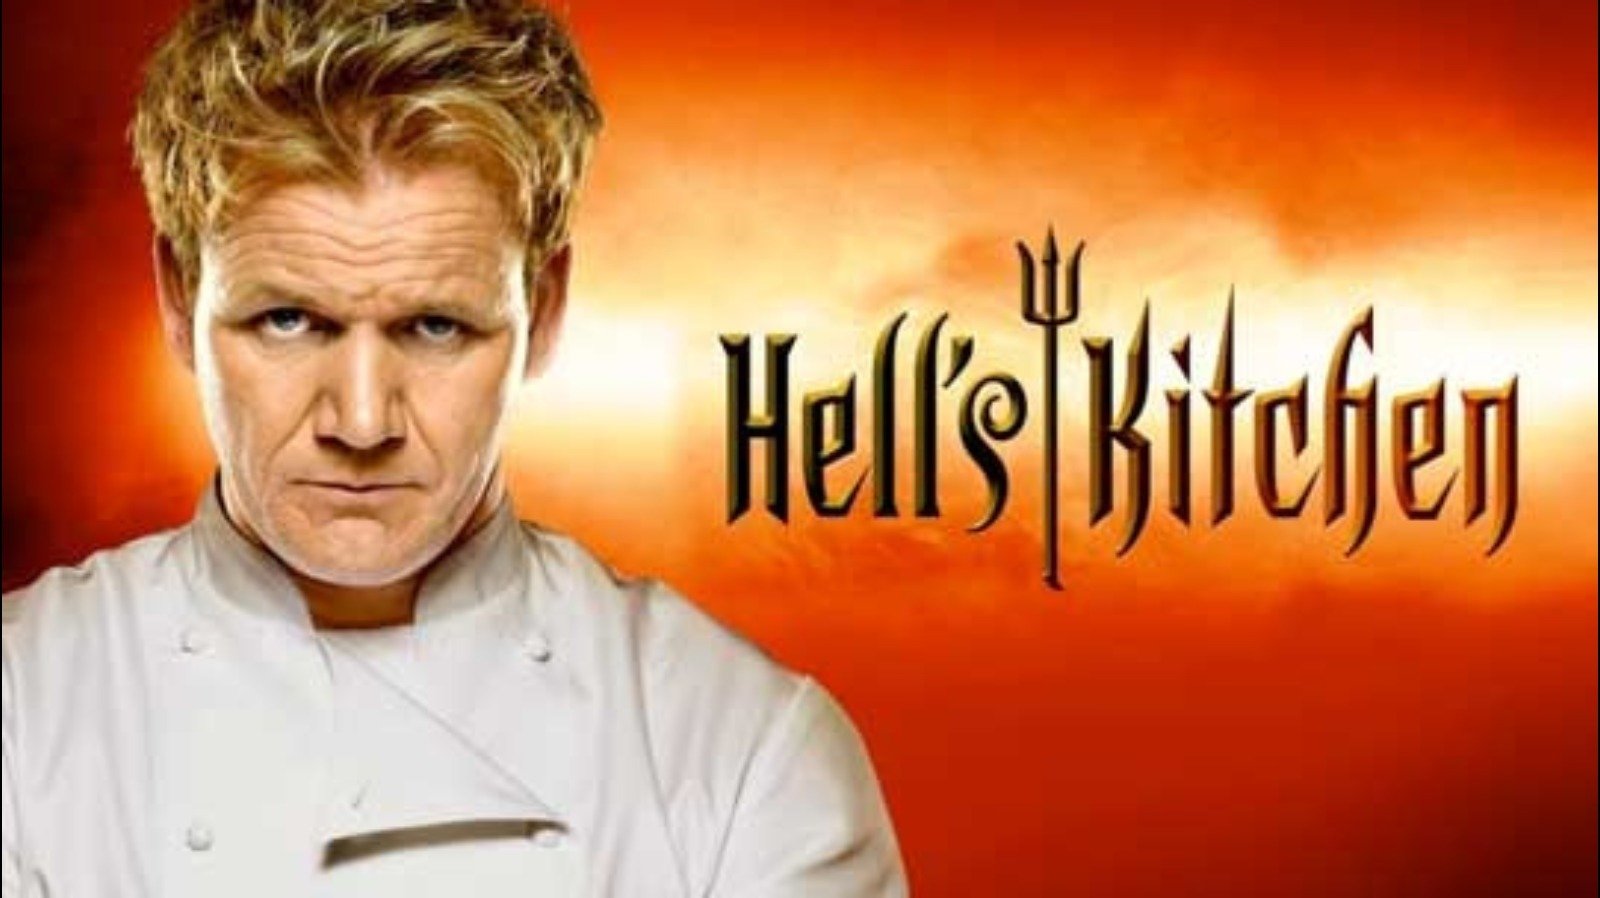 What Working With Gordon Ramsay Is Truly Like